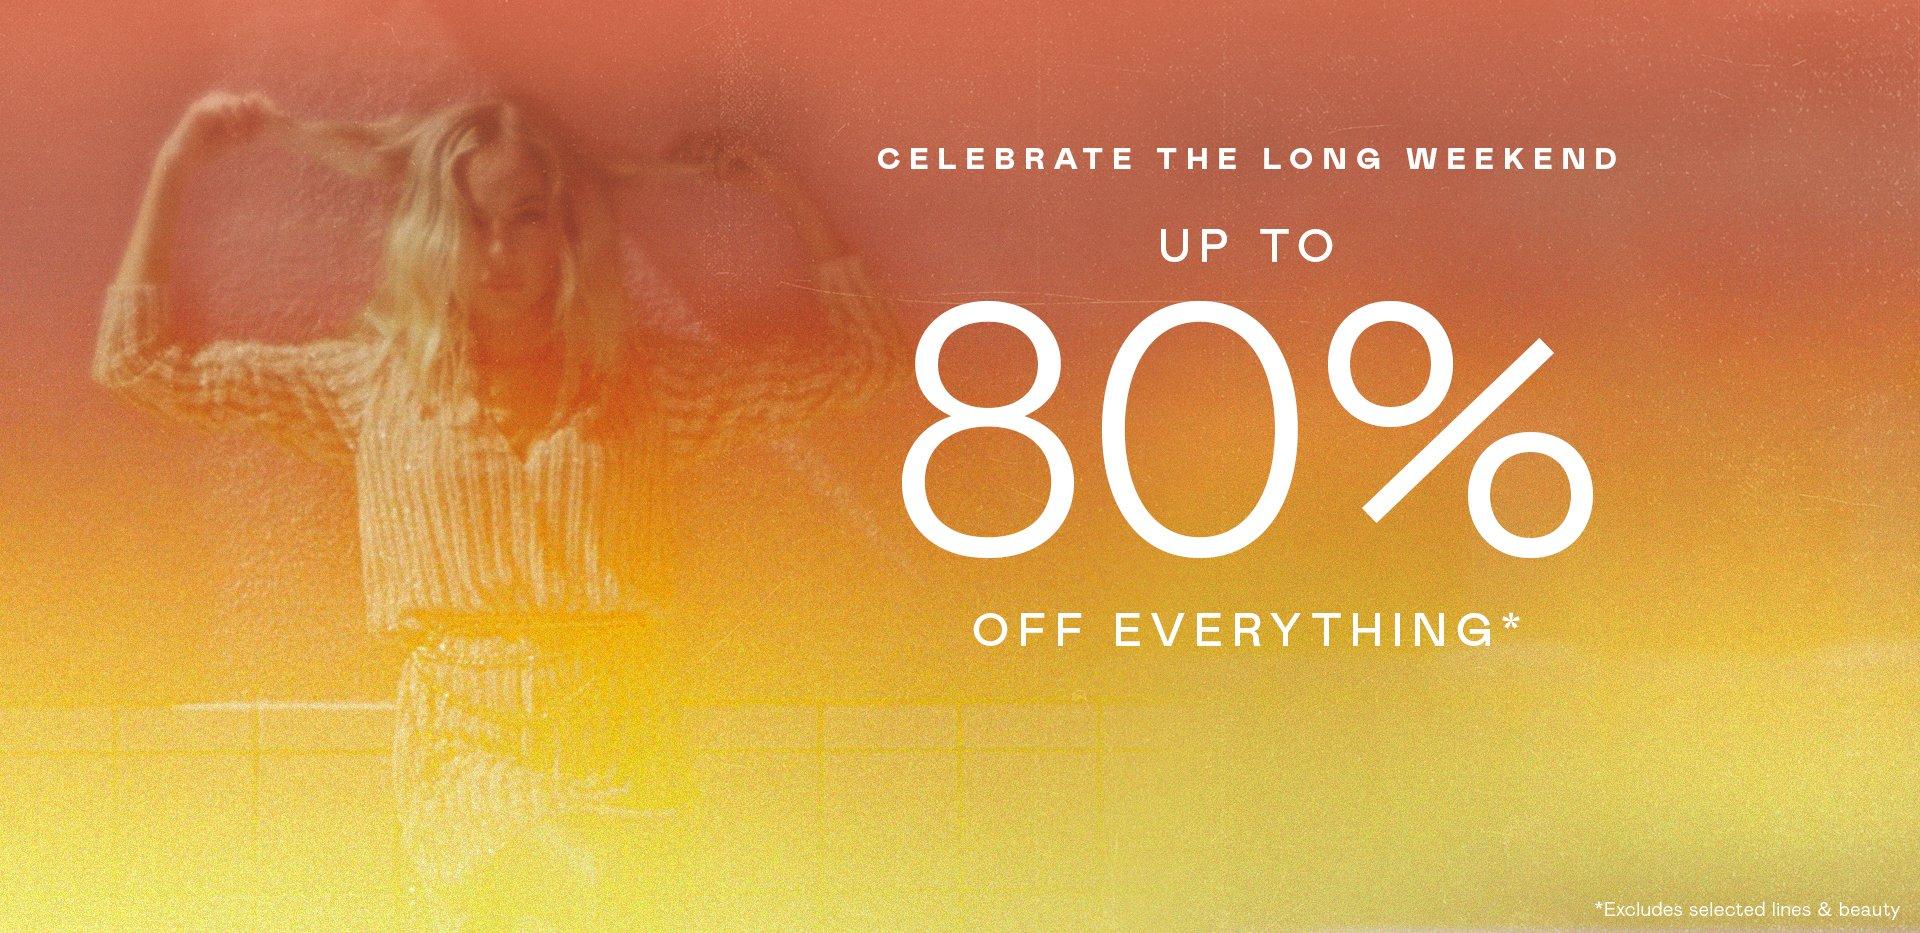 Up to 80% off everything*